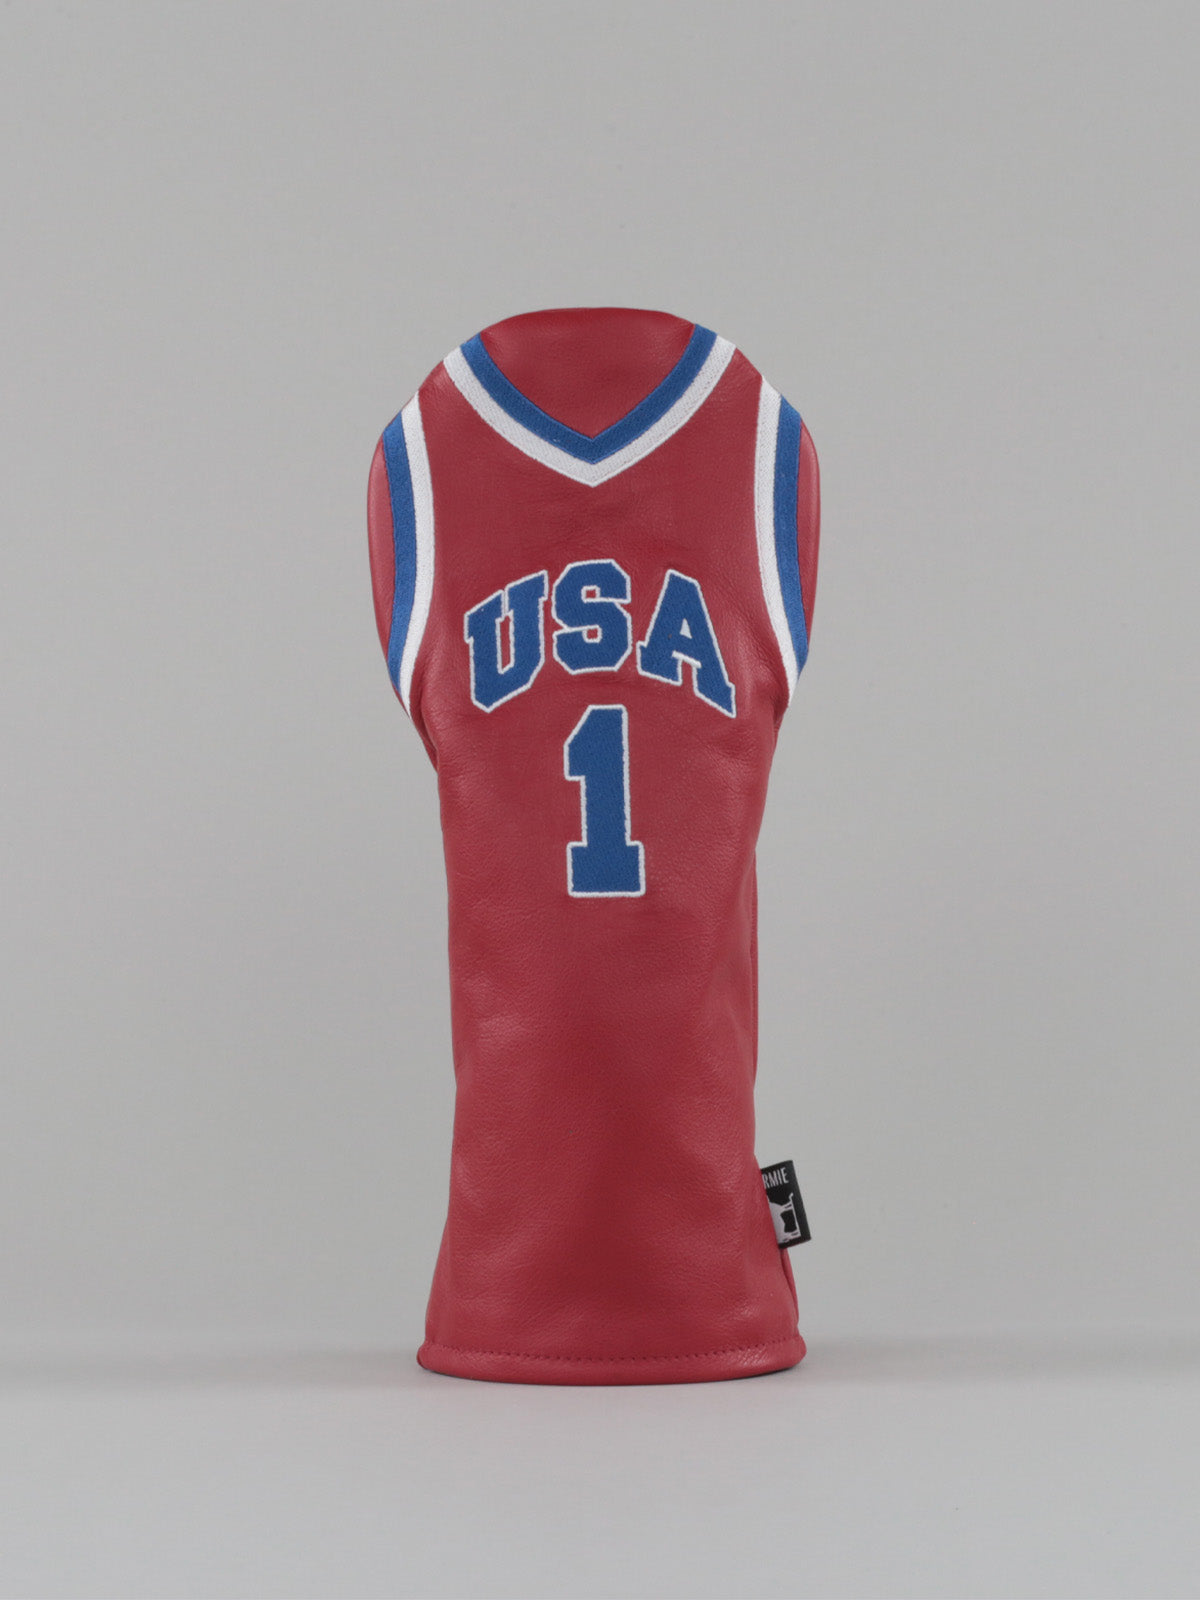 Dormie USA Jersey - Driver